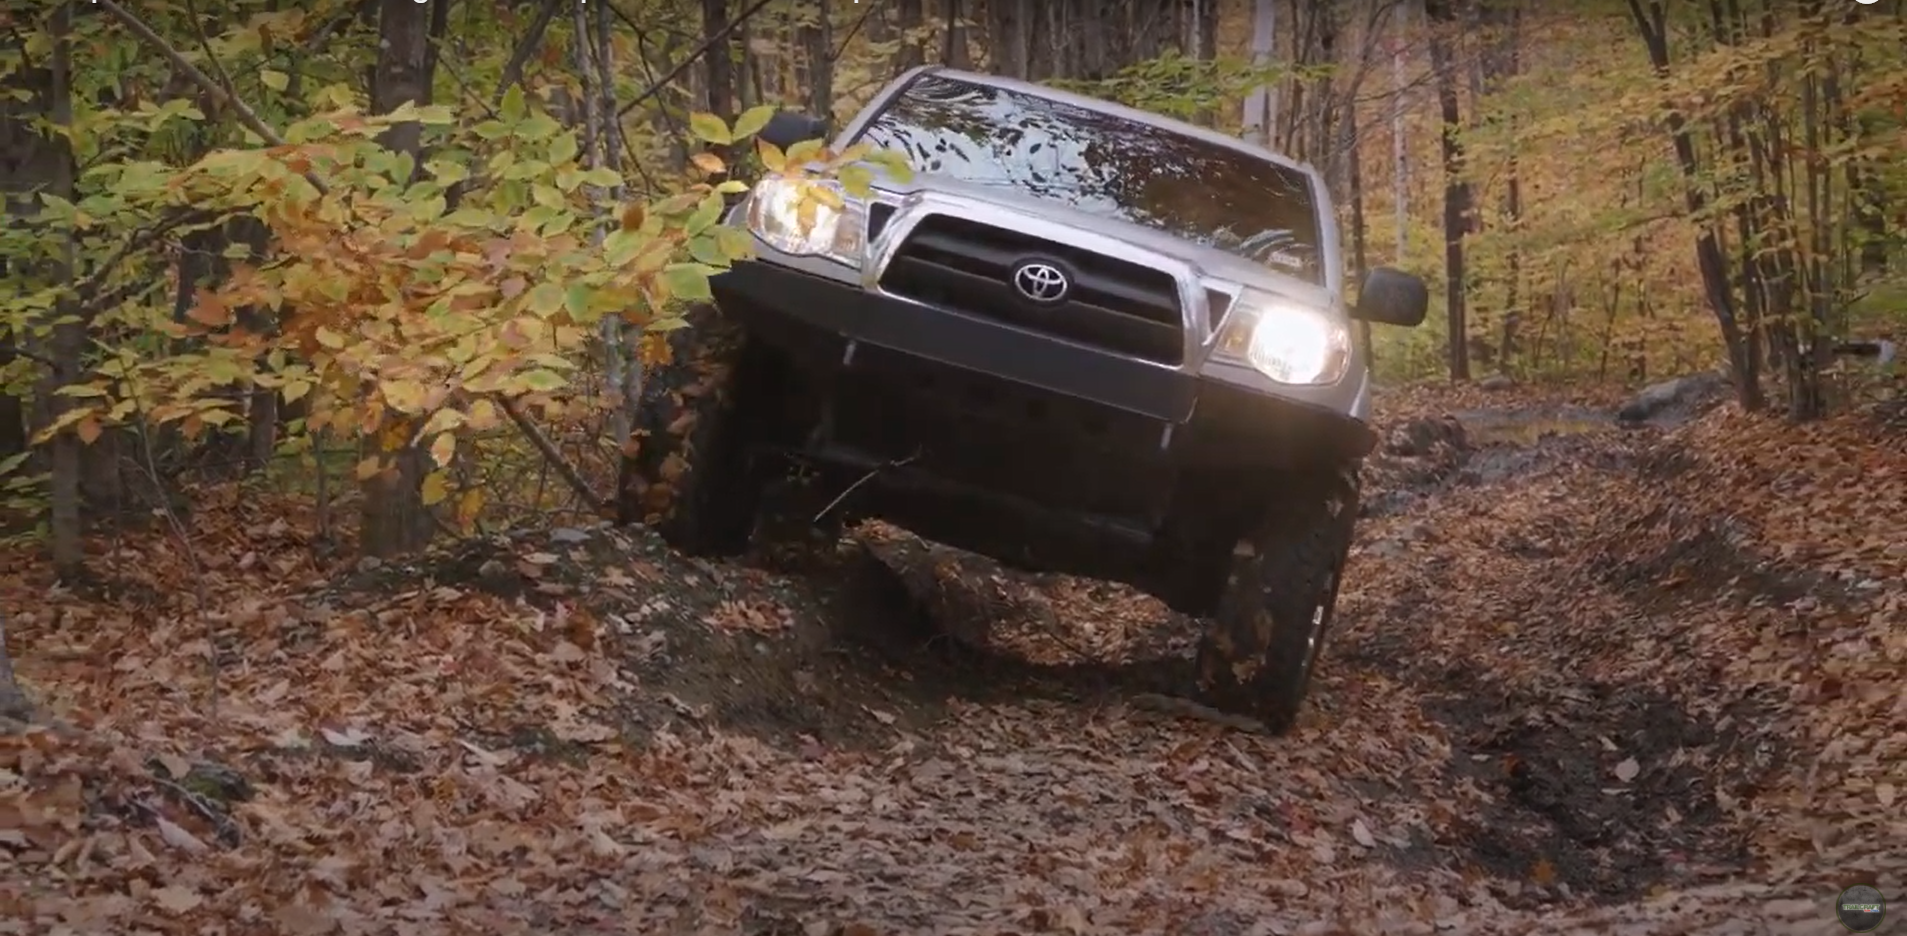 Tips for Driving Independent Front Suspension Off Road